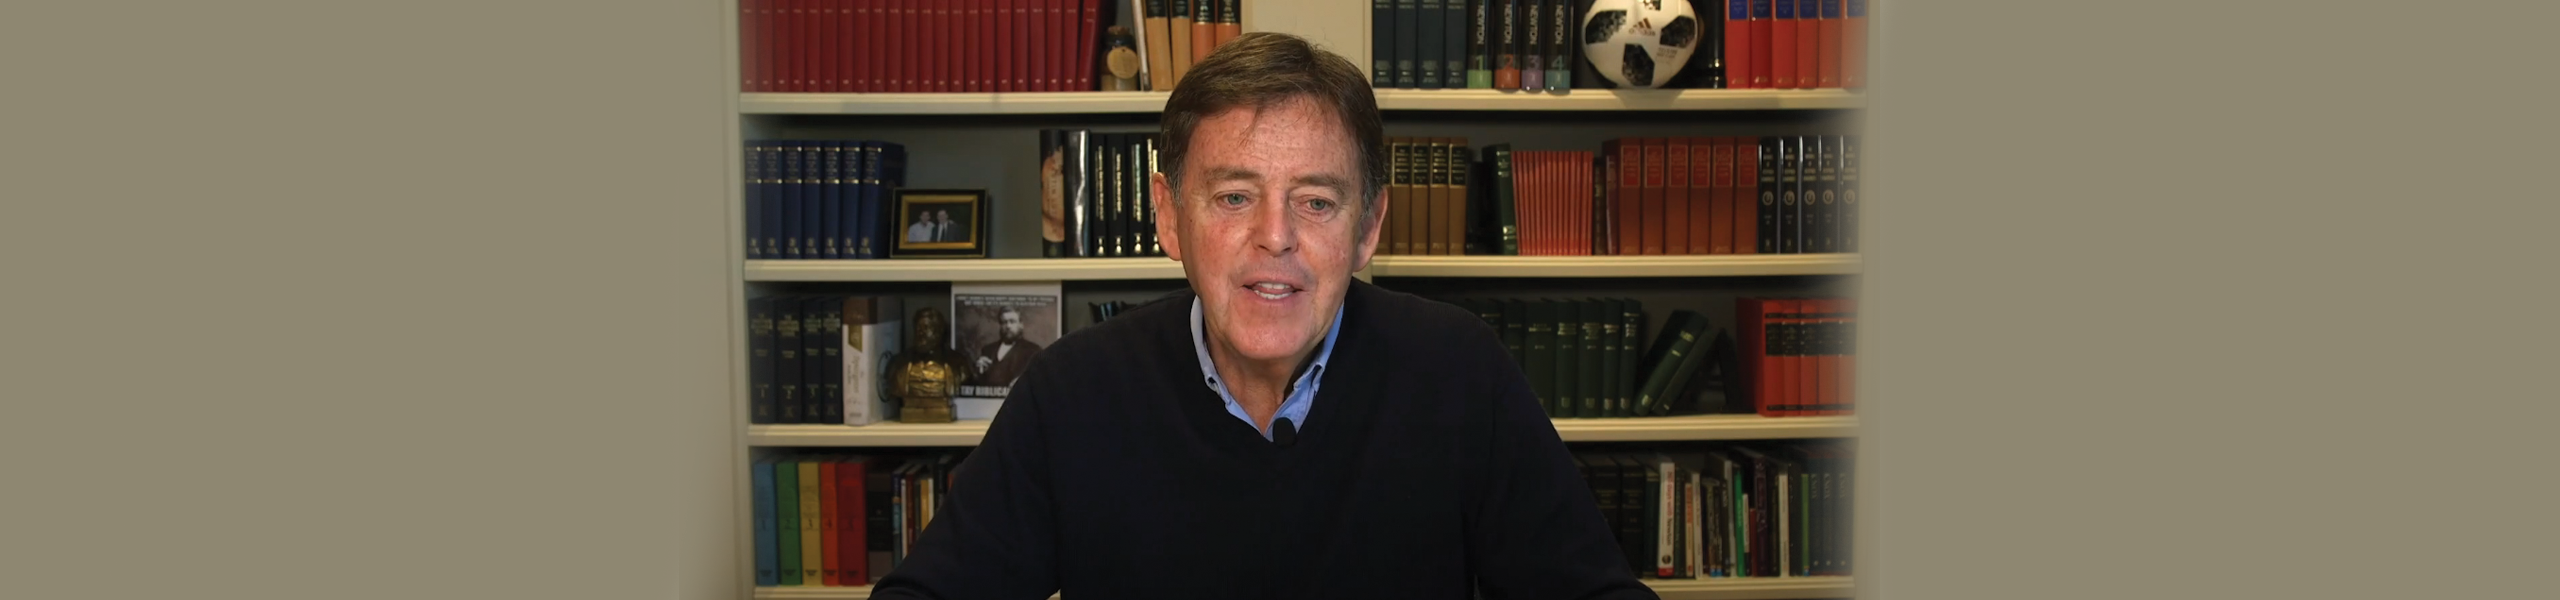 Encouragement from Alistair Begg in Difficult Times